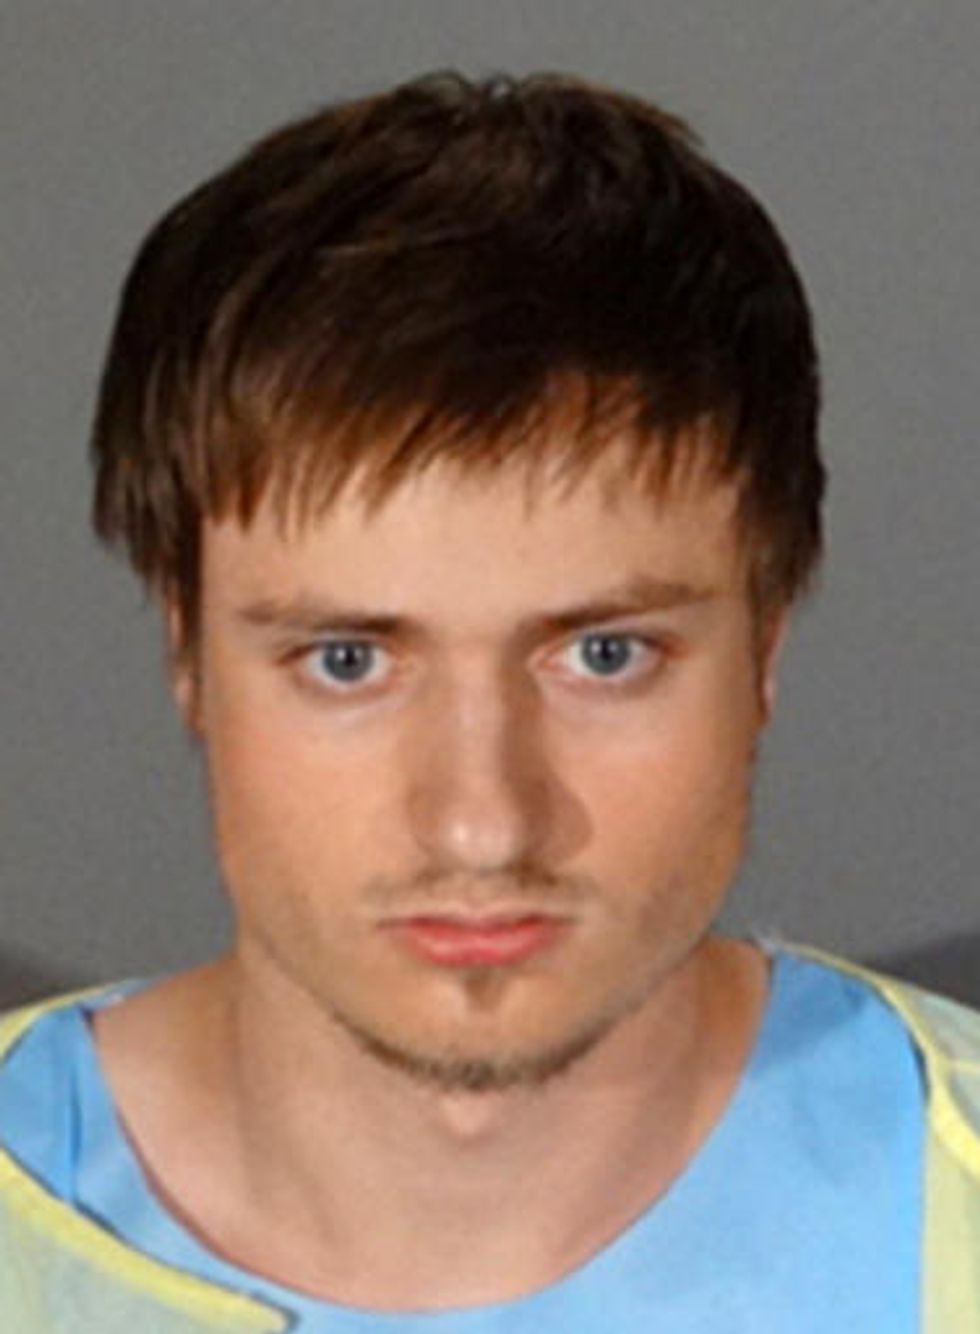 Charges Filed Against Indiana Man Arrested Before L.A. Gay Pride Event